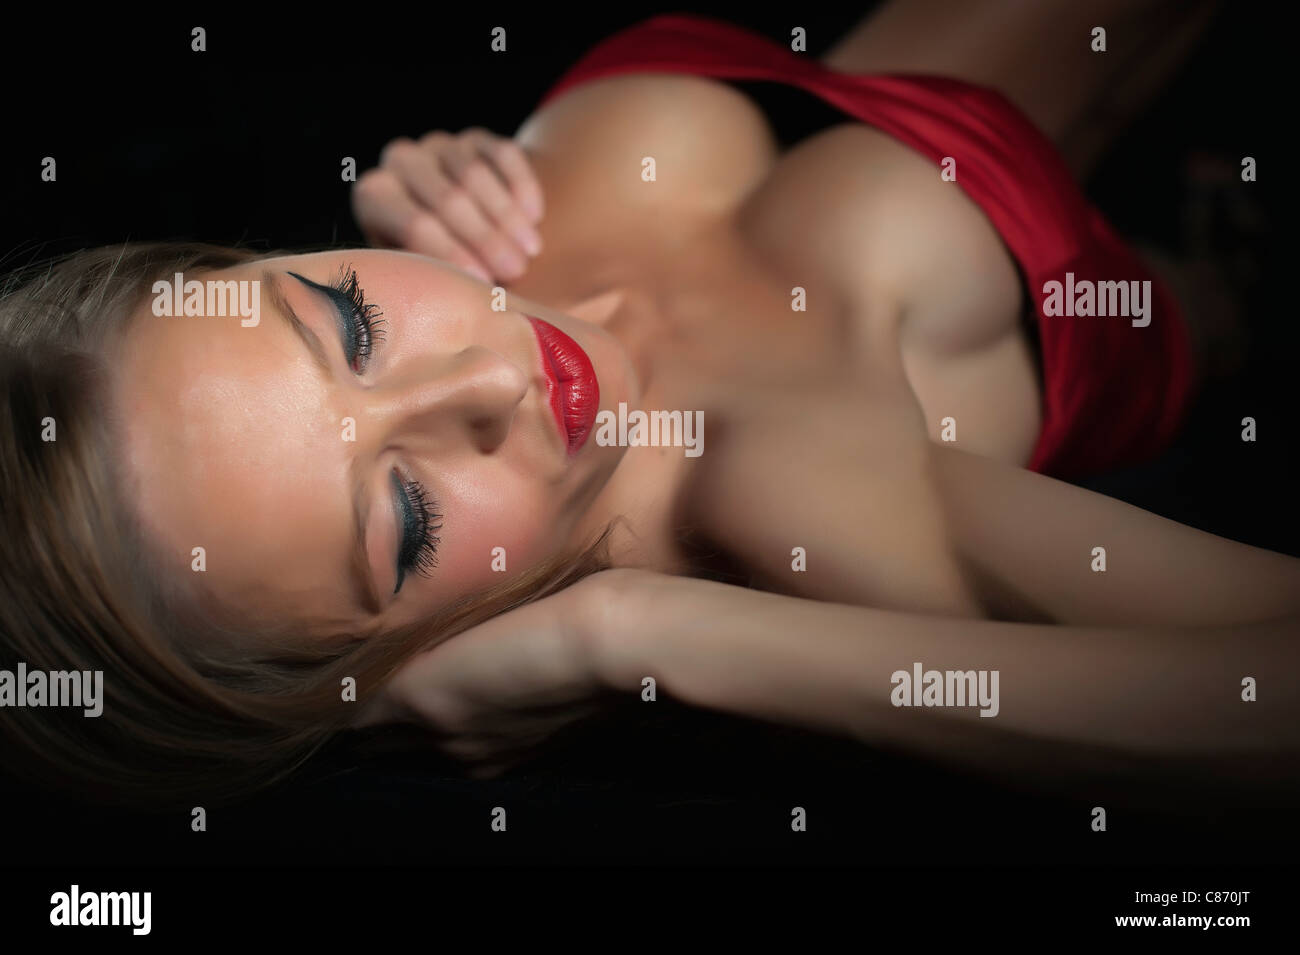 Sexy woman with big boobs lying on her back Stock Photo - Alamy